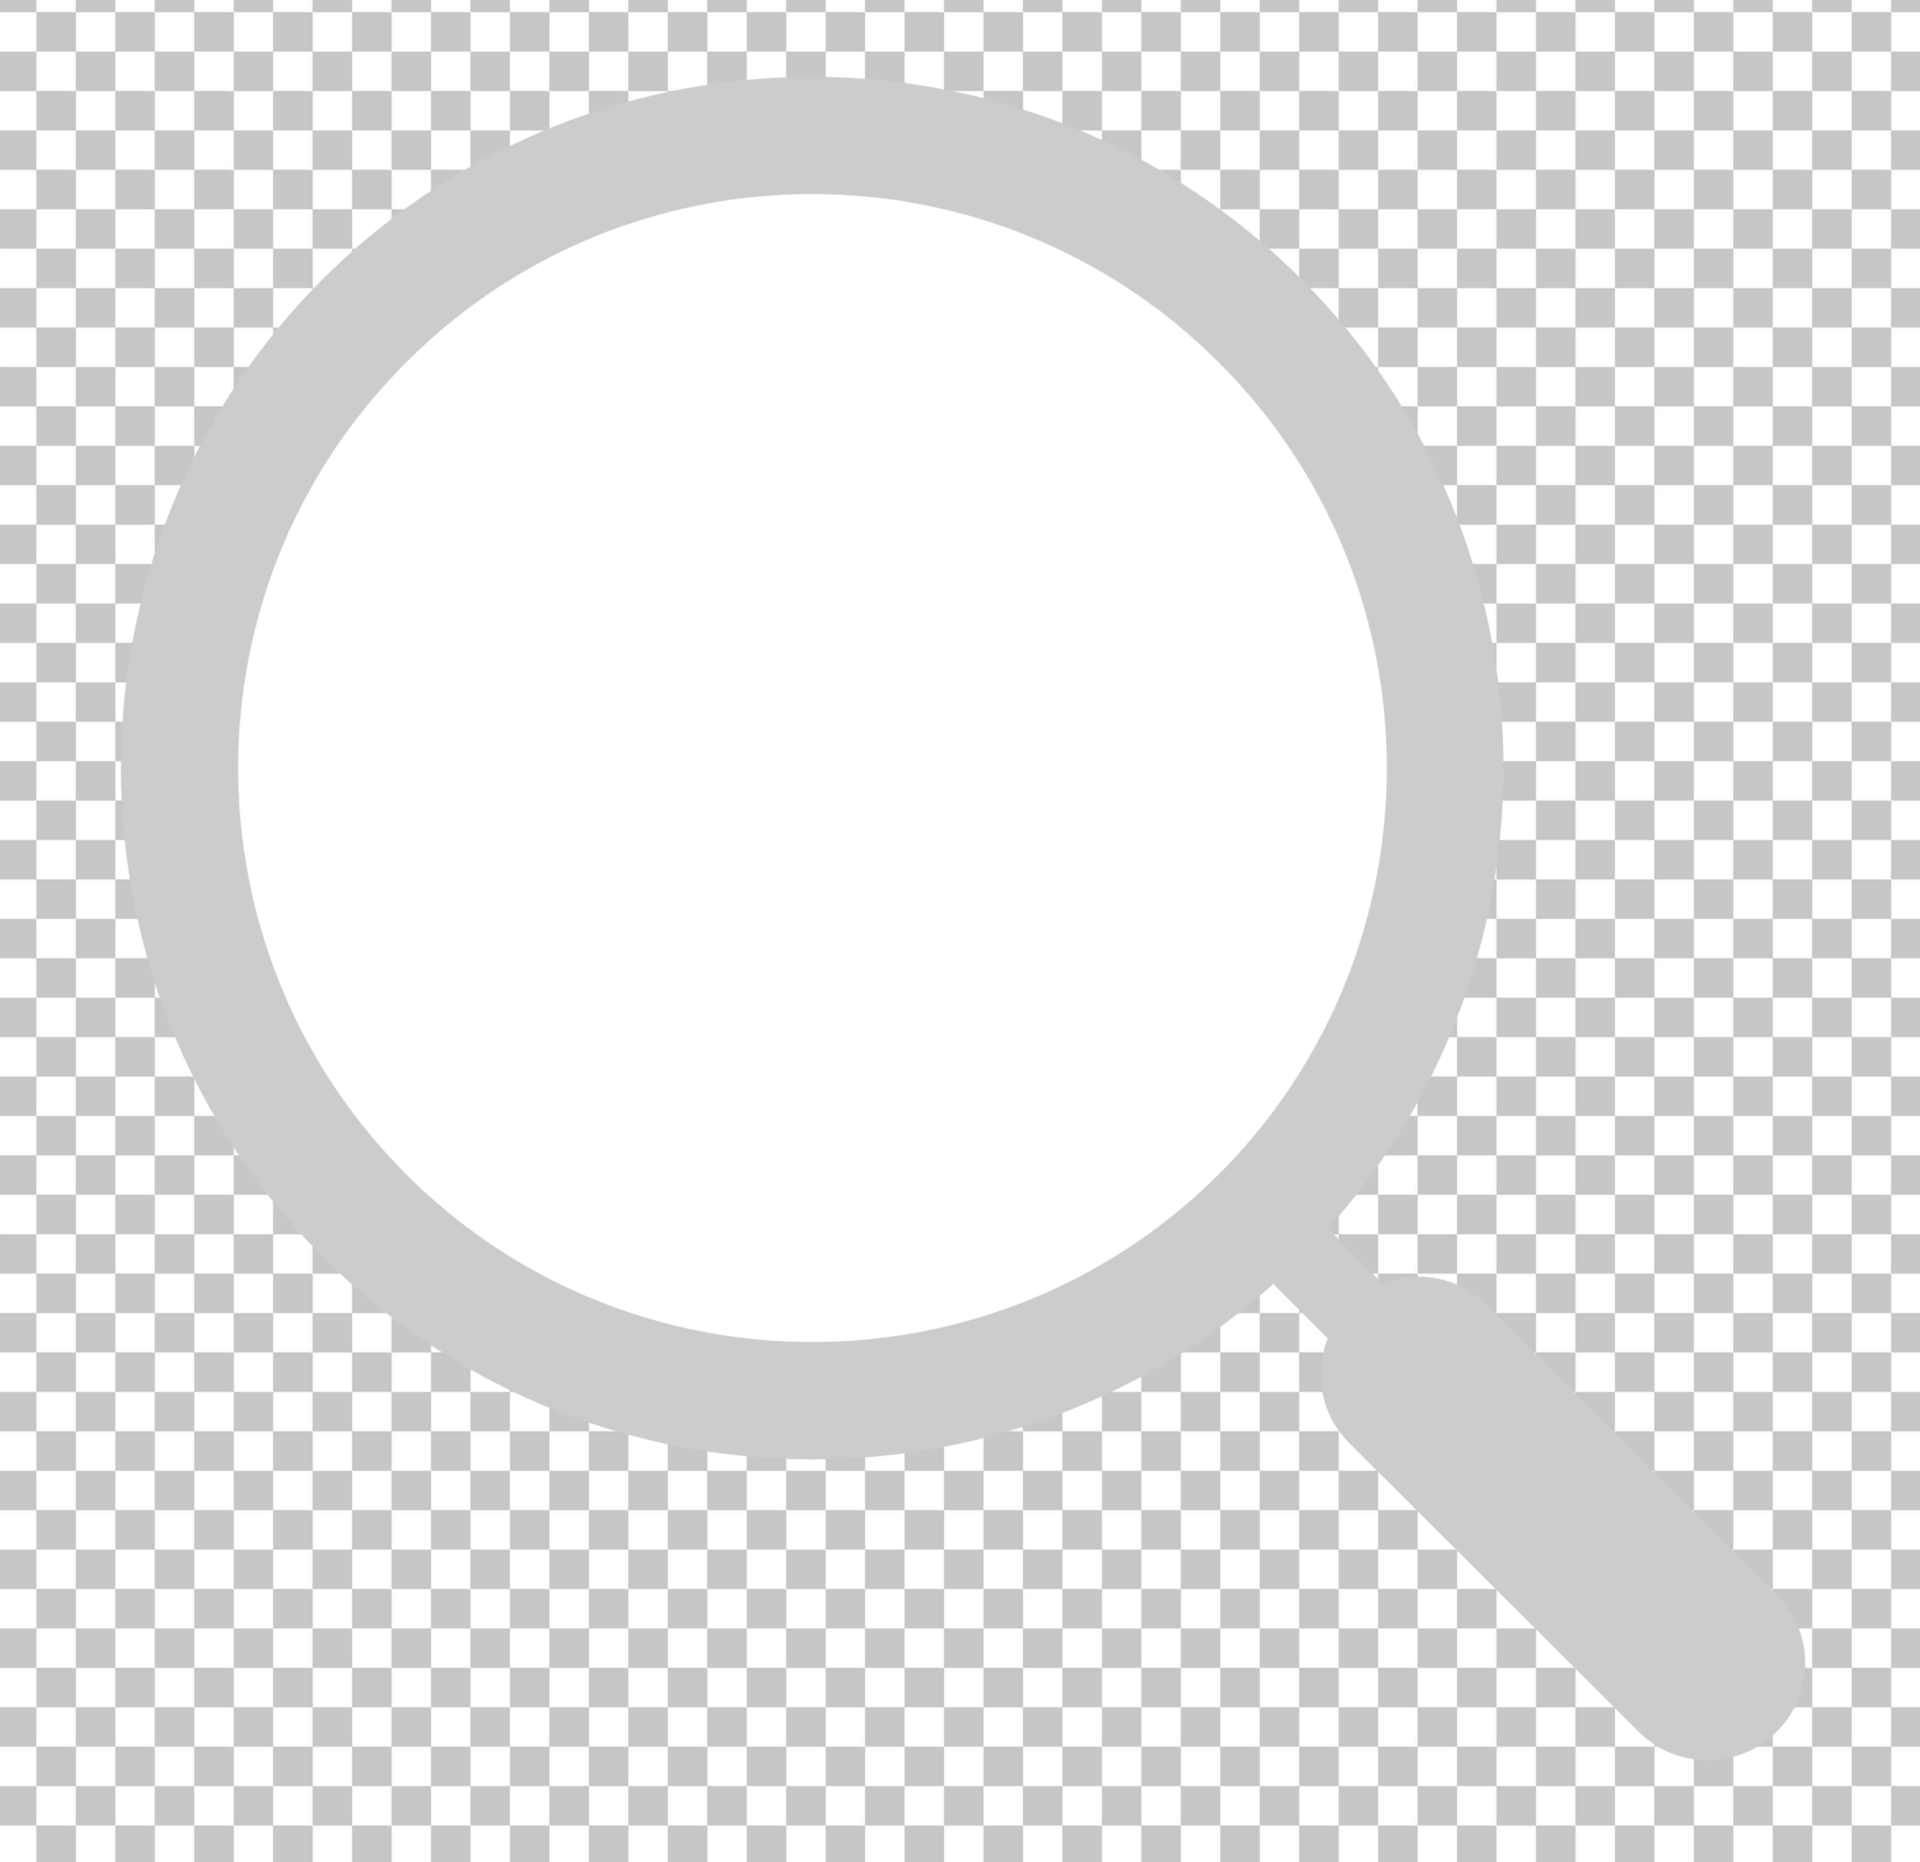 Magnifying glass icon PNG Image